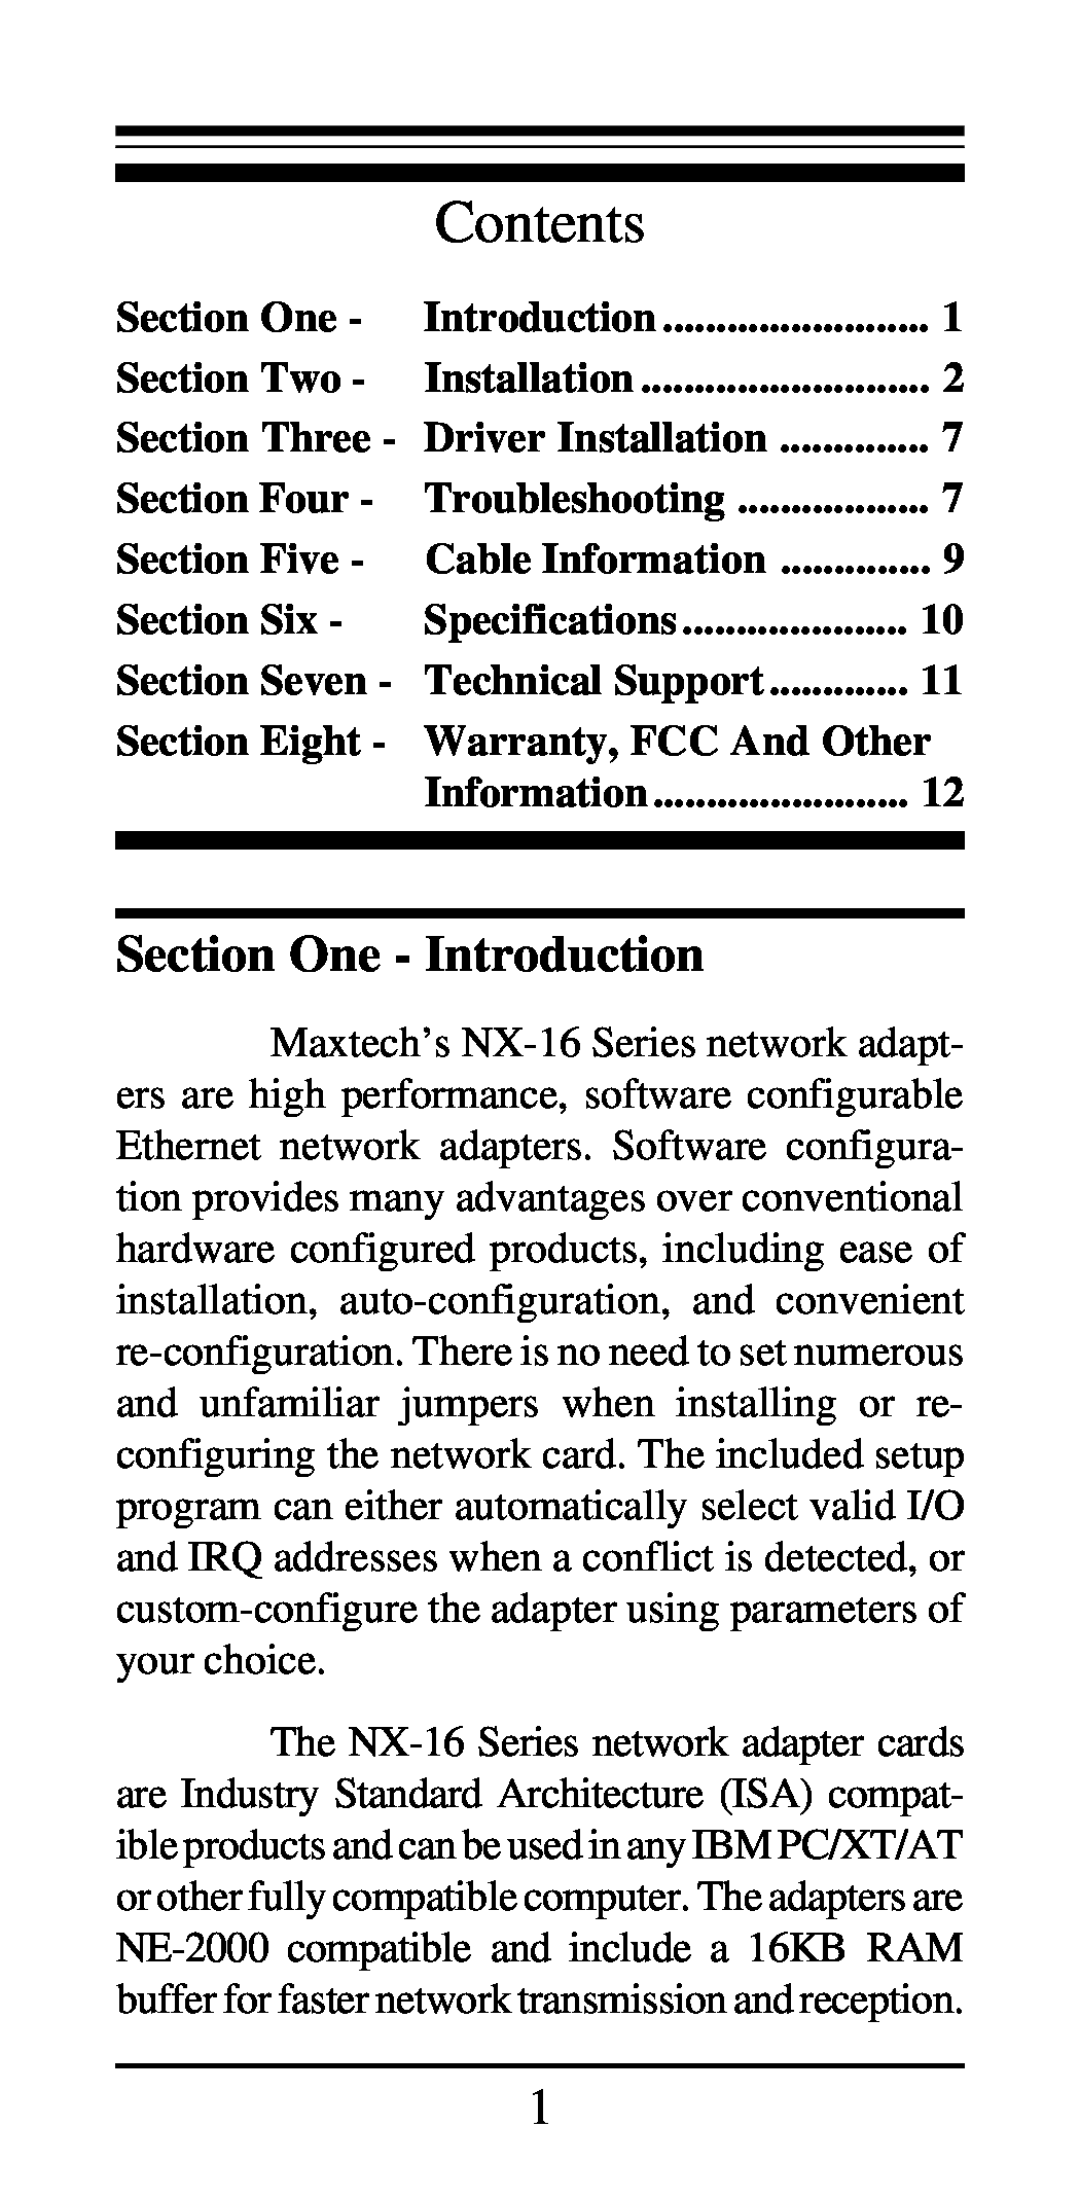 MaxTech NX-16 manual Section One - Introduction, Contents 